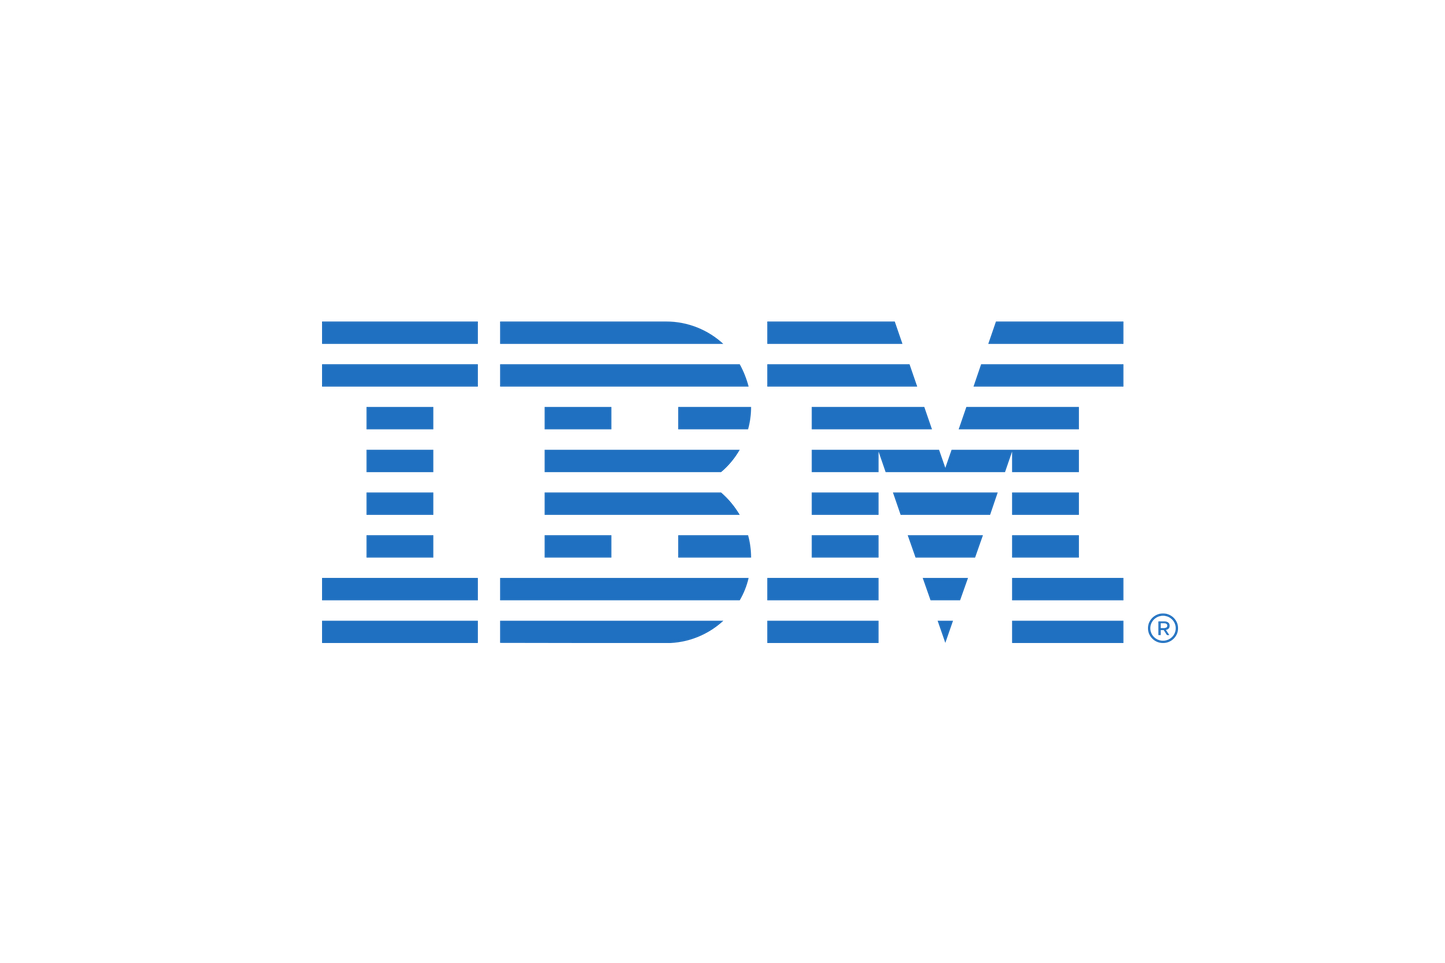 Cloudera Data Science Workbench - Business User with IBM Authorized User Subscription License